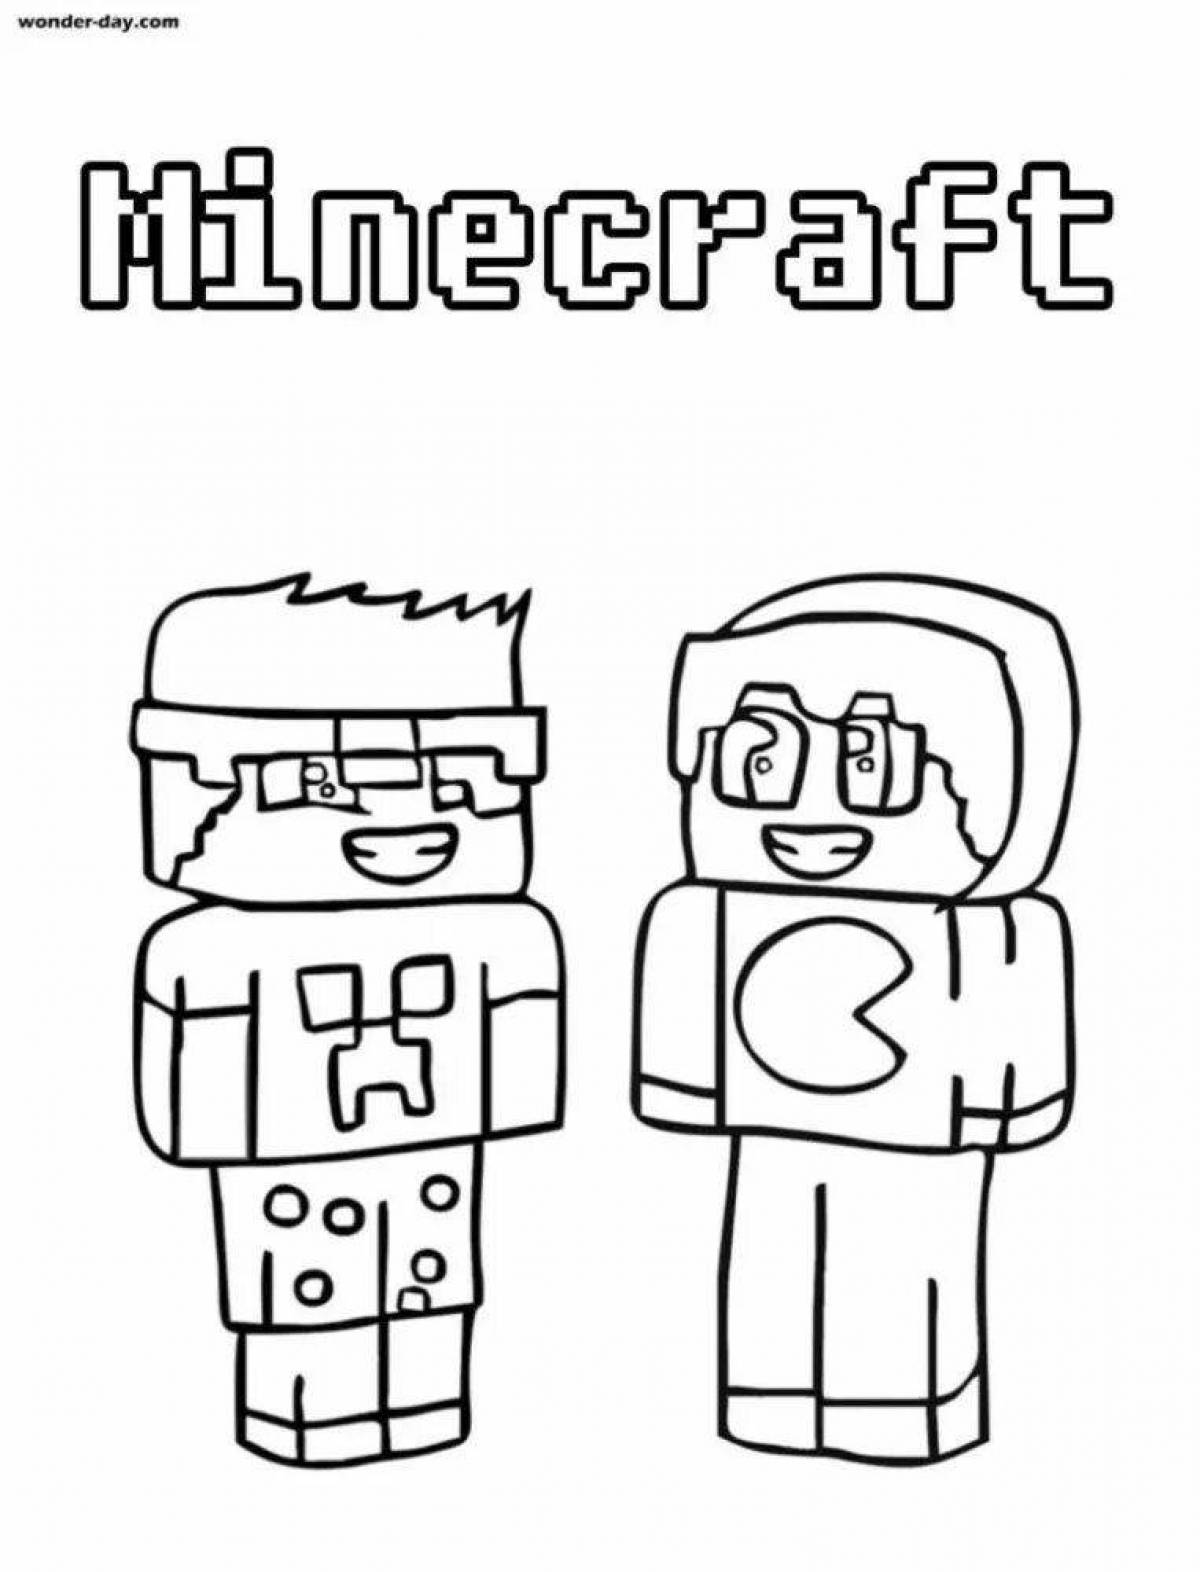 Colorful minecraft golem coloring page